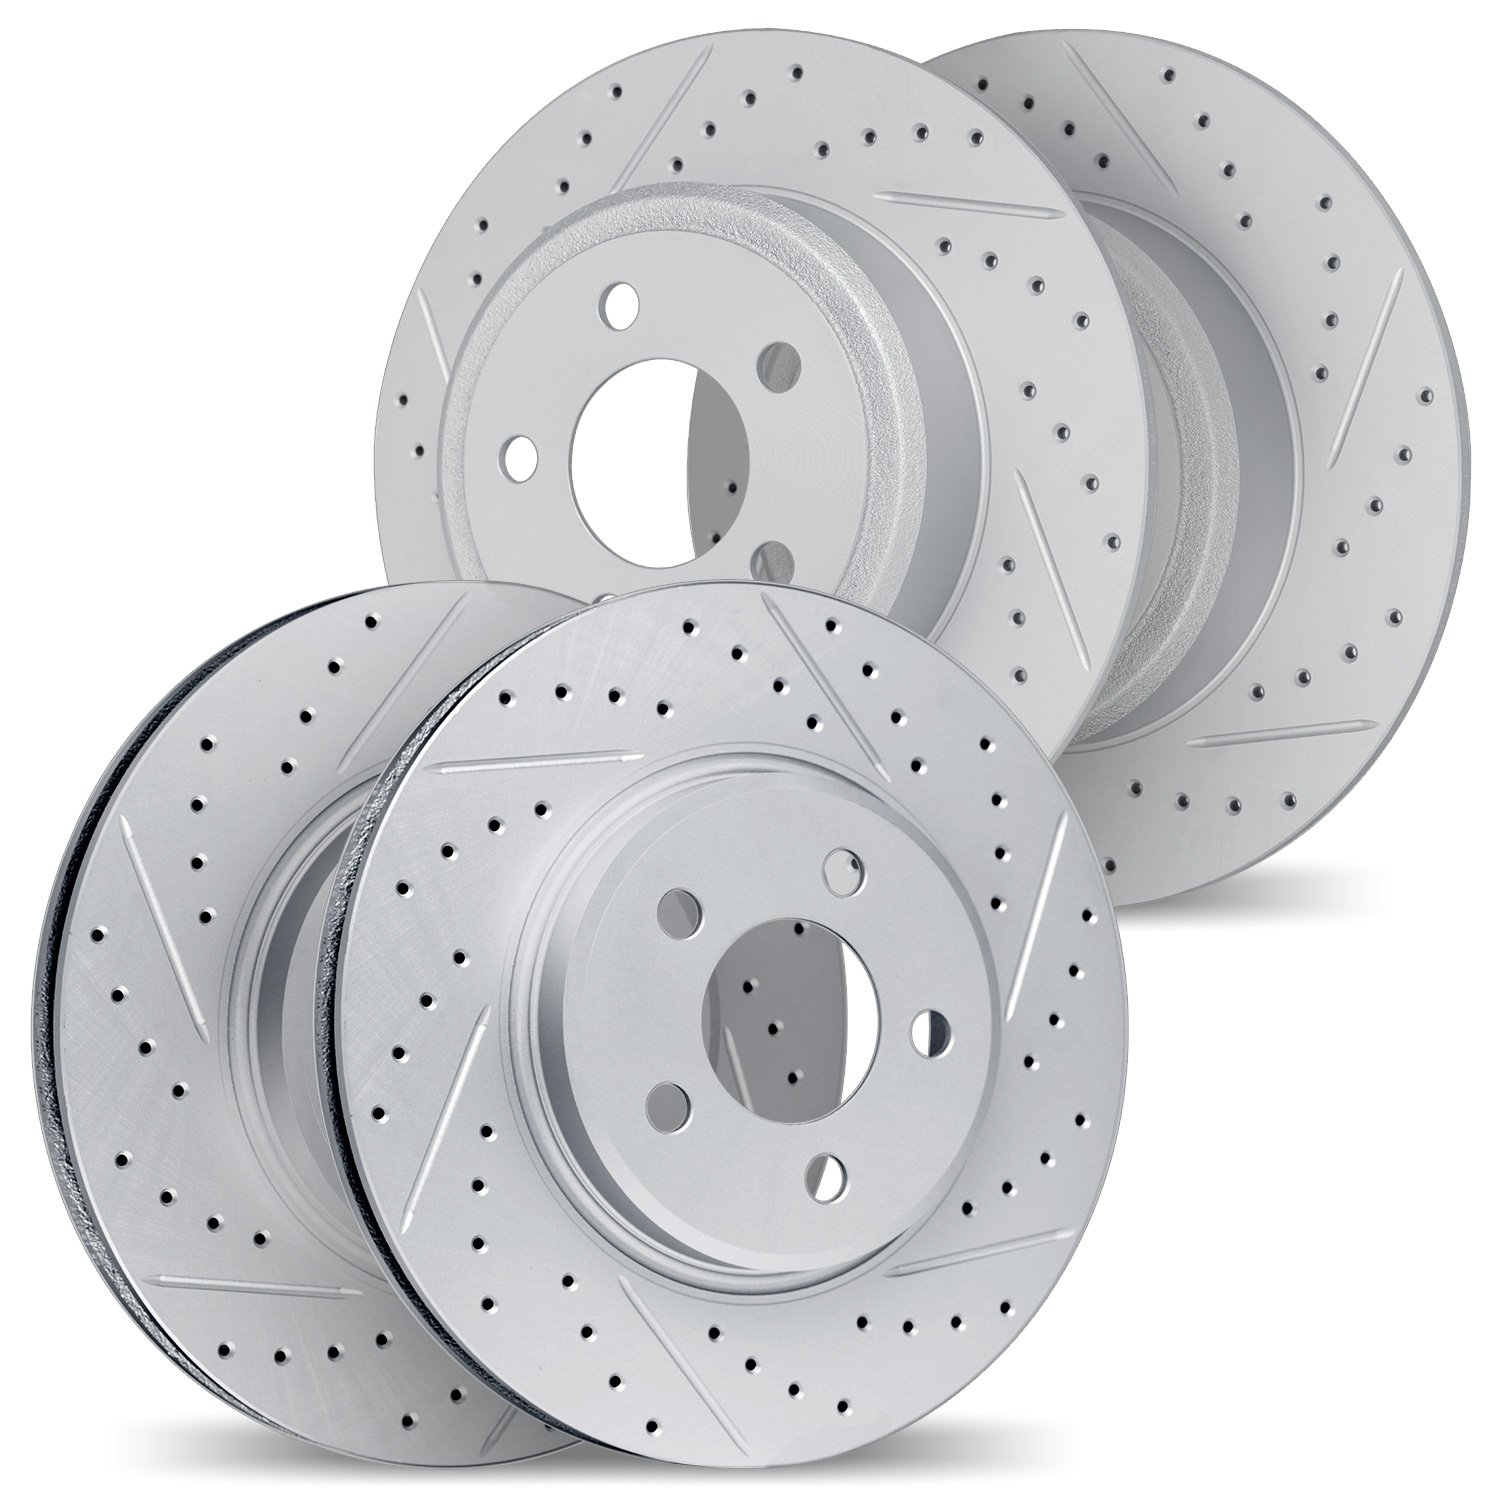 2004-03059 Geoperformance Drilled/Slotted Brake Rotors, 2004-2005 Kia/Hyundai/Genesis, Position: Front and Rear